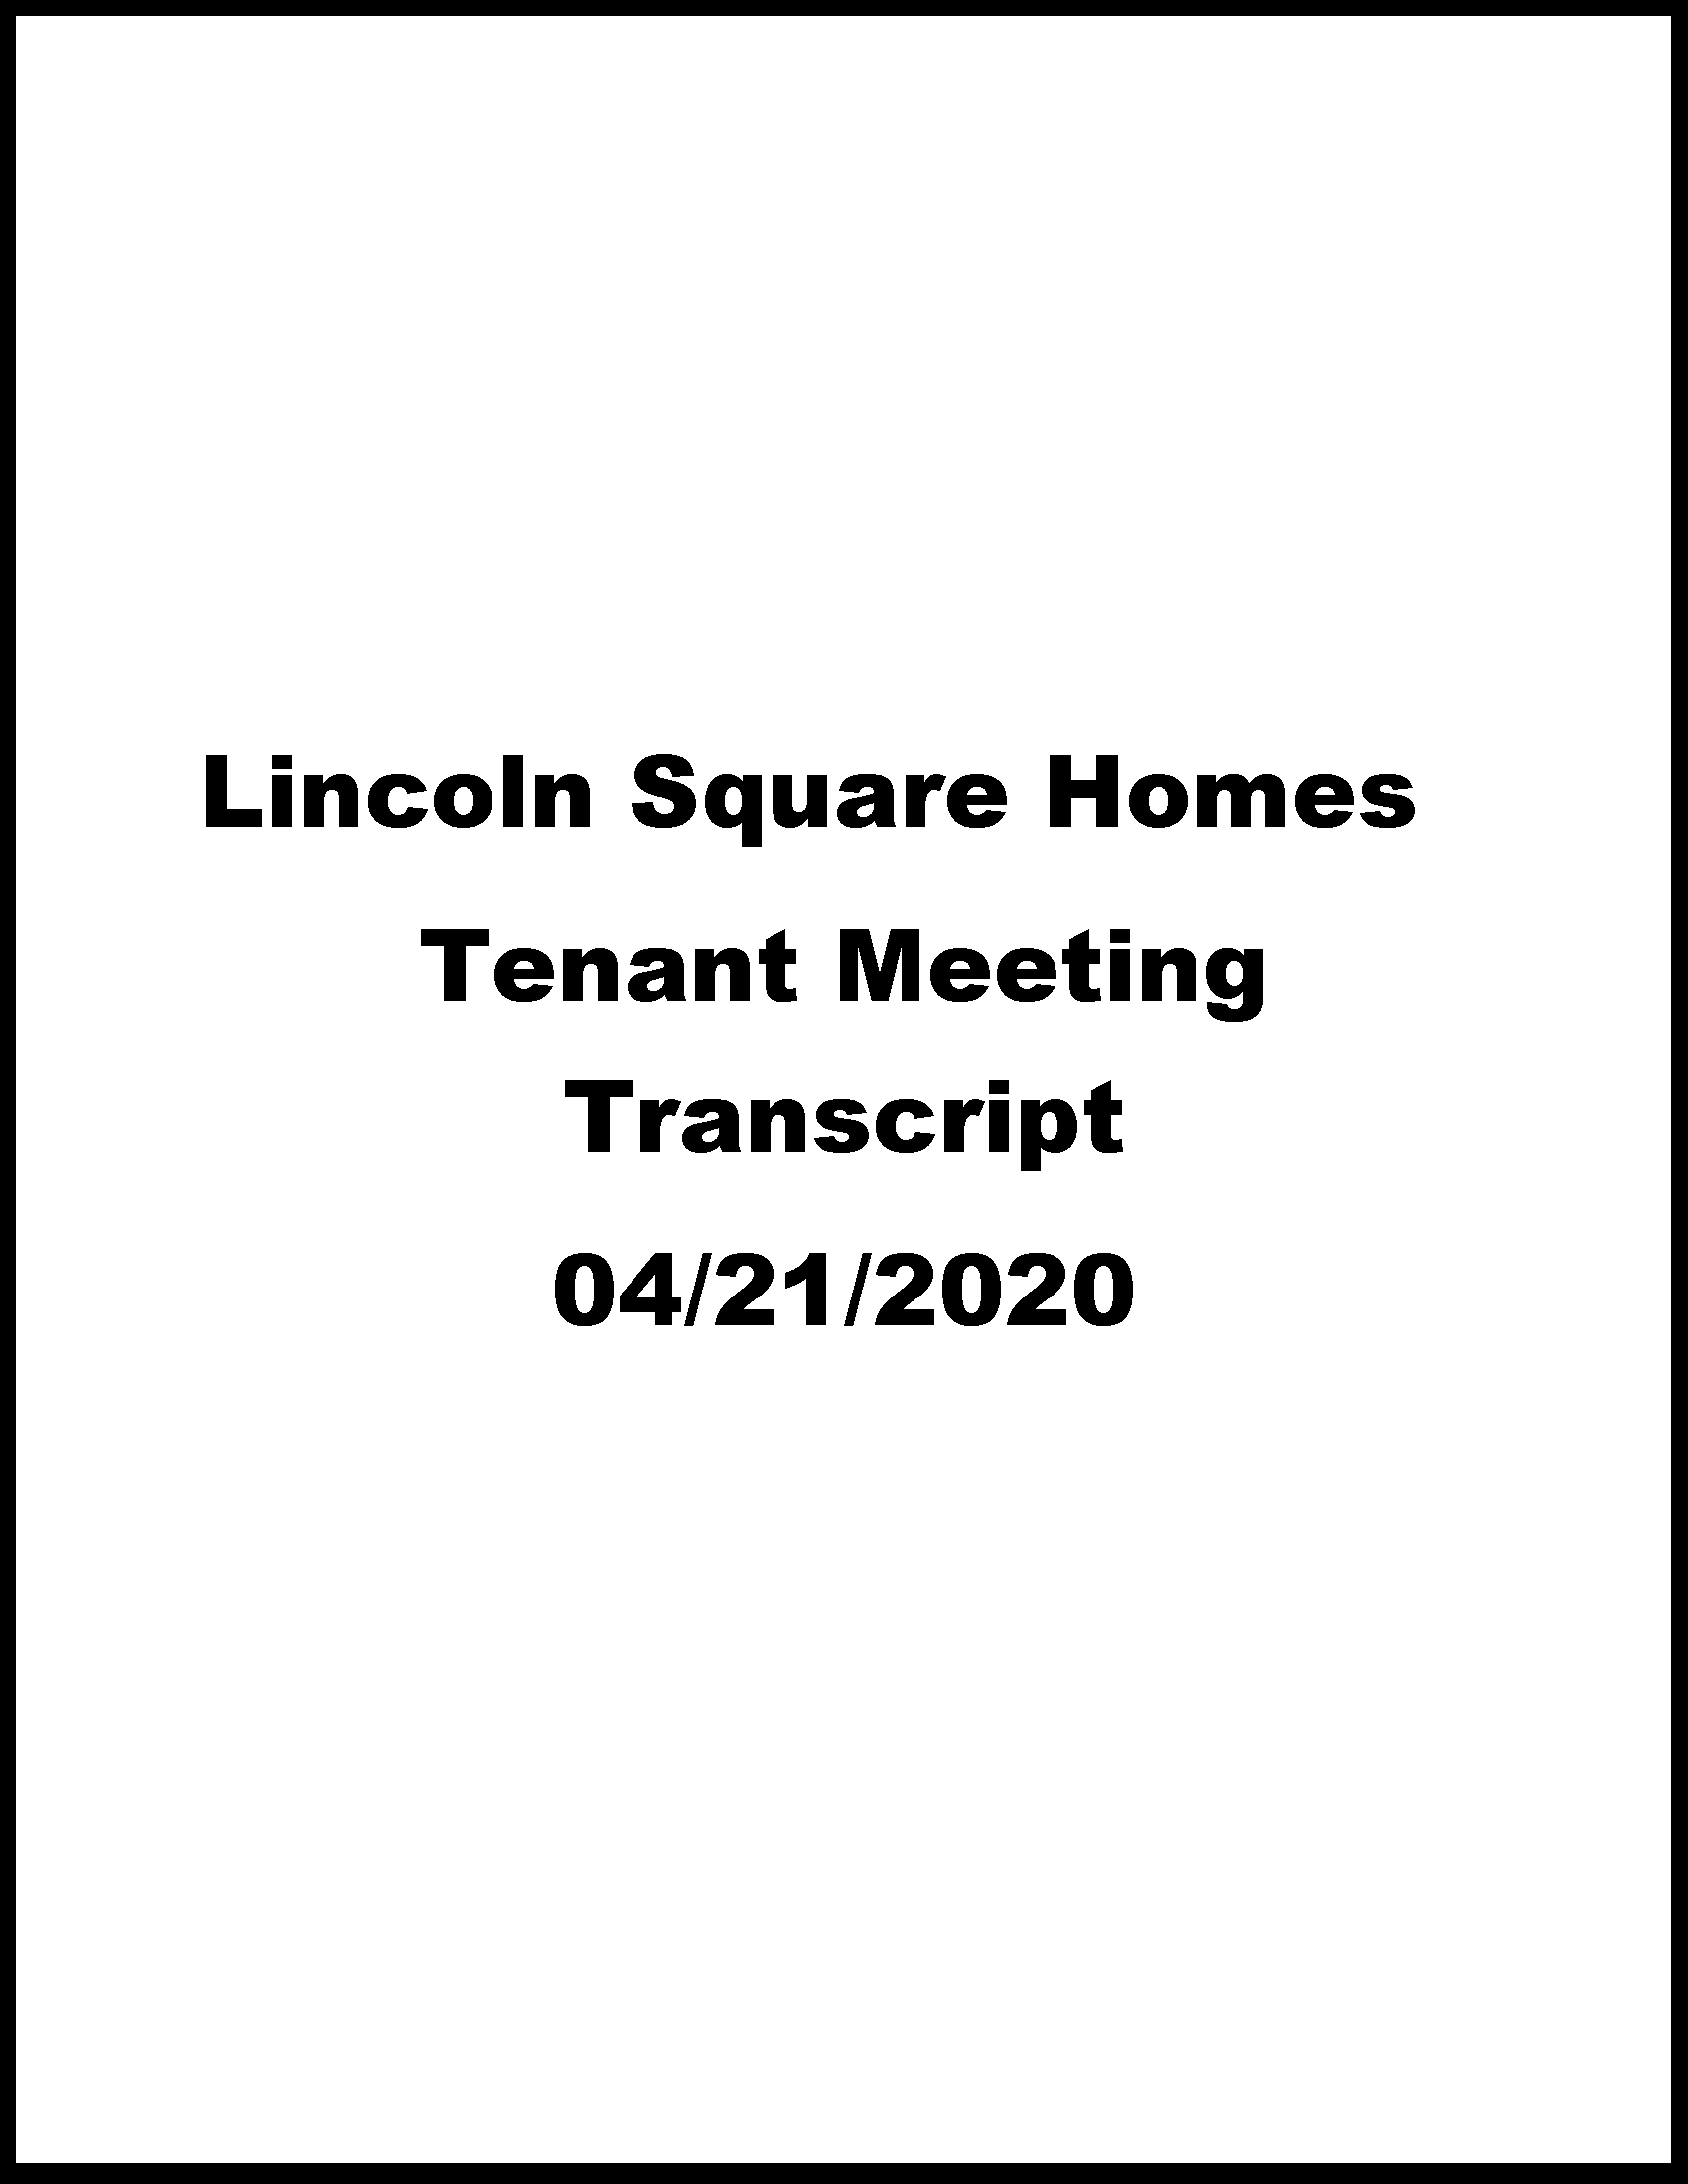 Lincoln Square Relocation and Disposition Updates